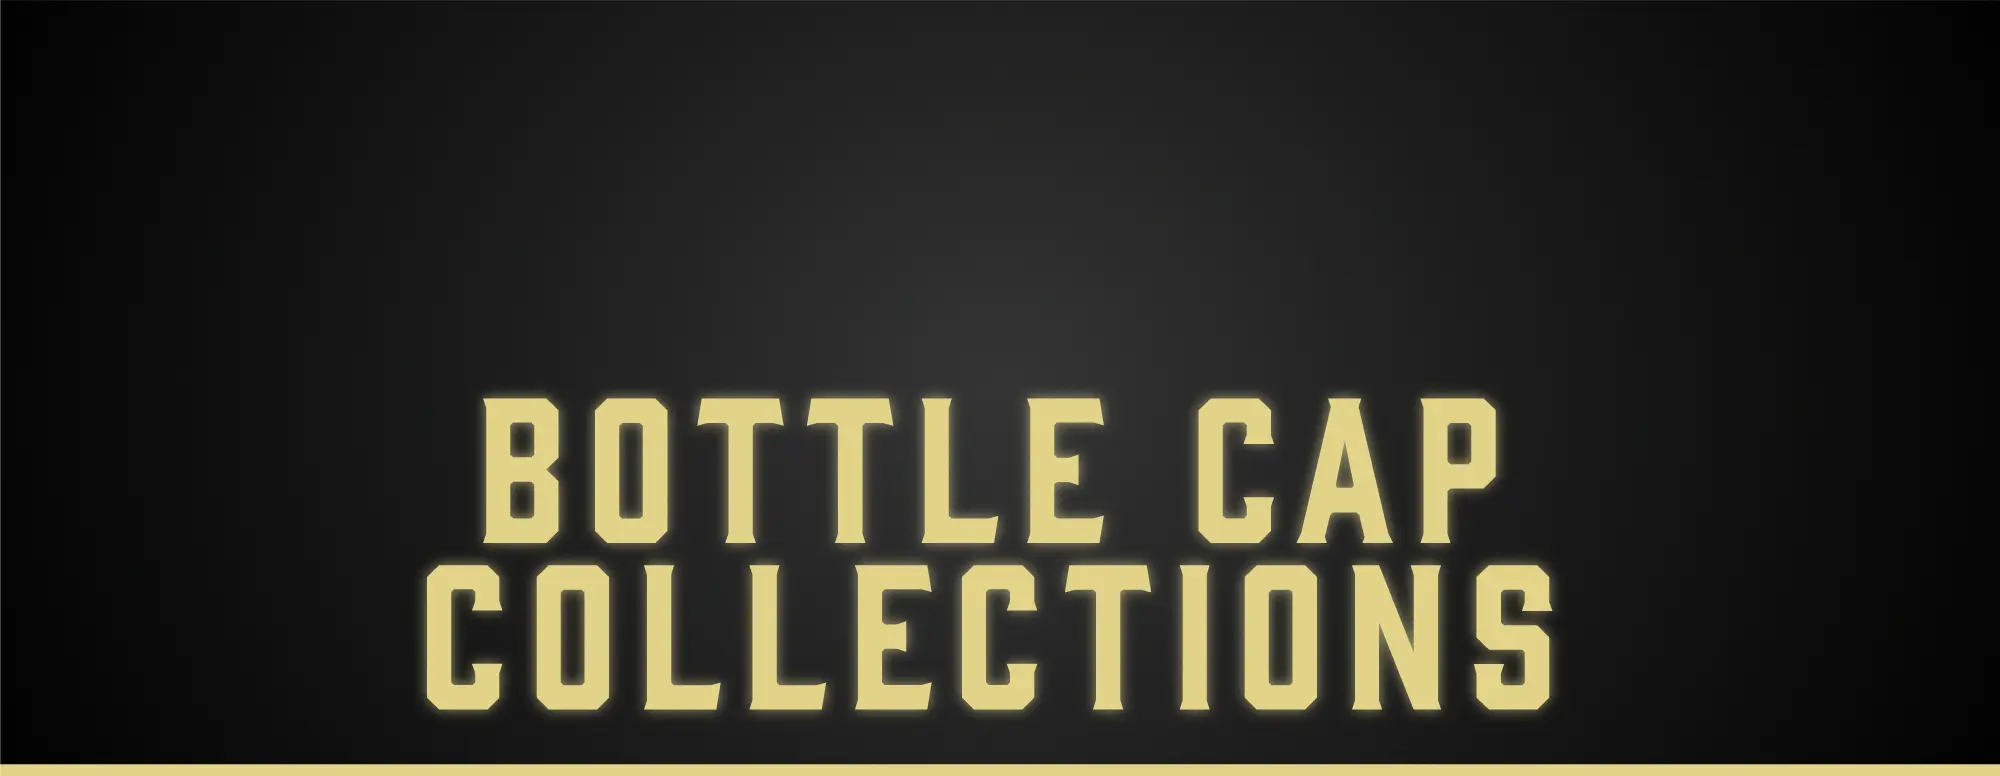 Blockchain Bottle Cap NFT Collections on OpenSea, in brief Bottle Cap Collections available to buy for Crypto.